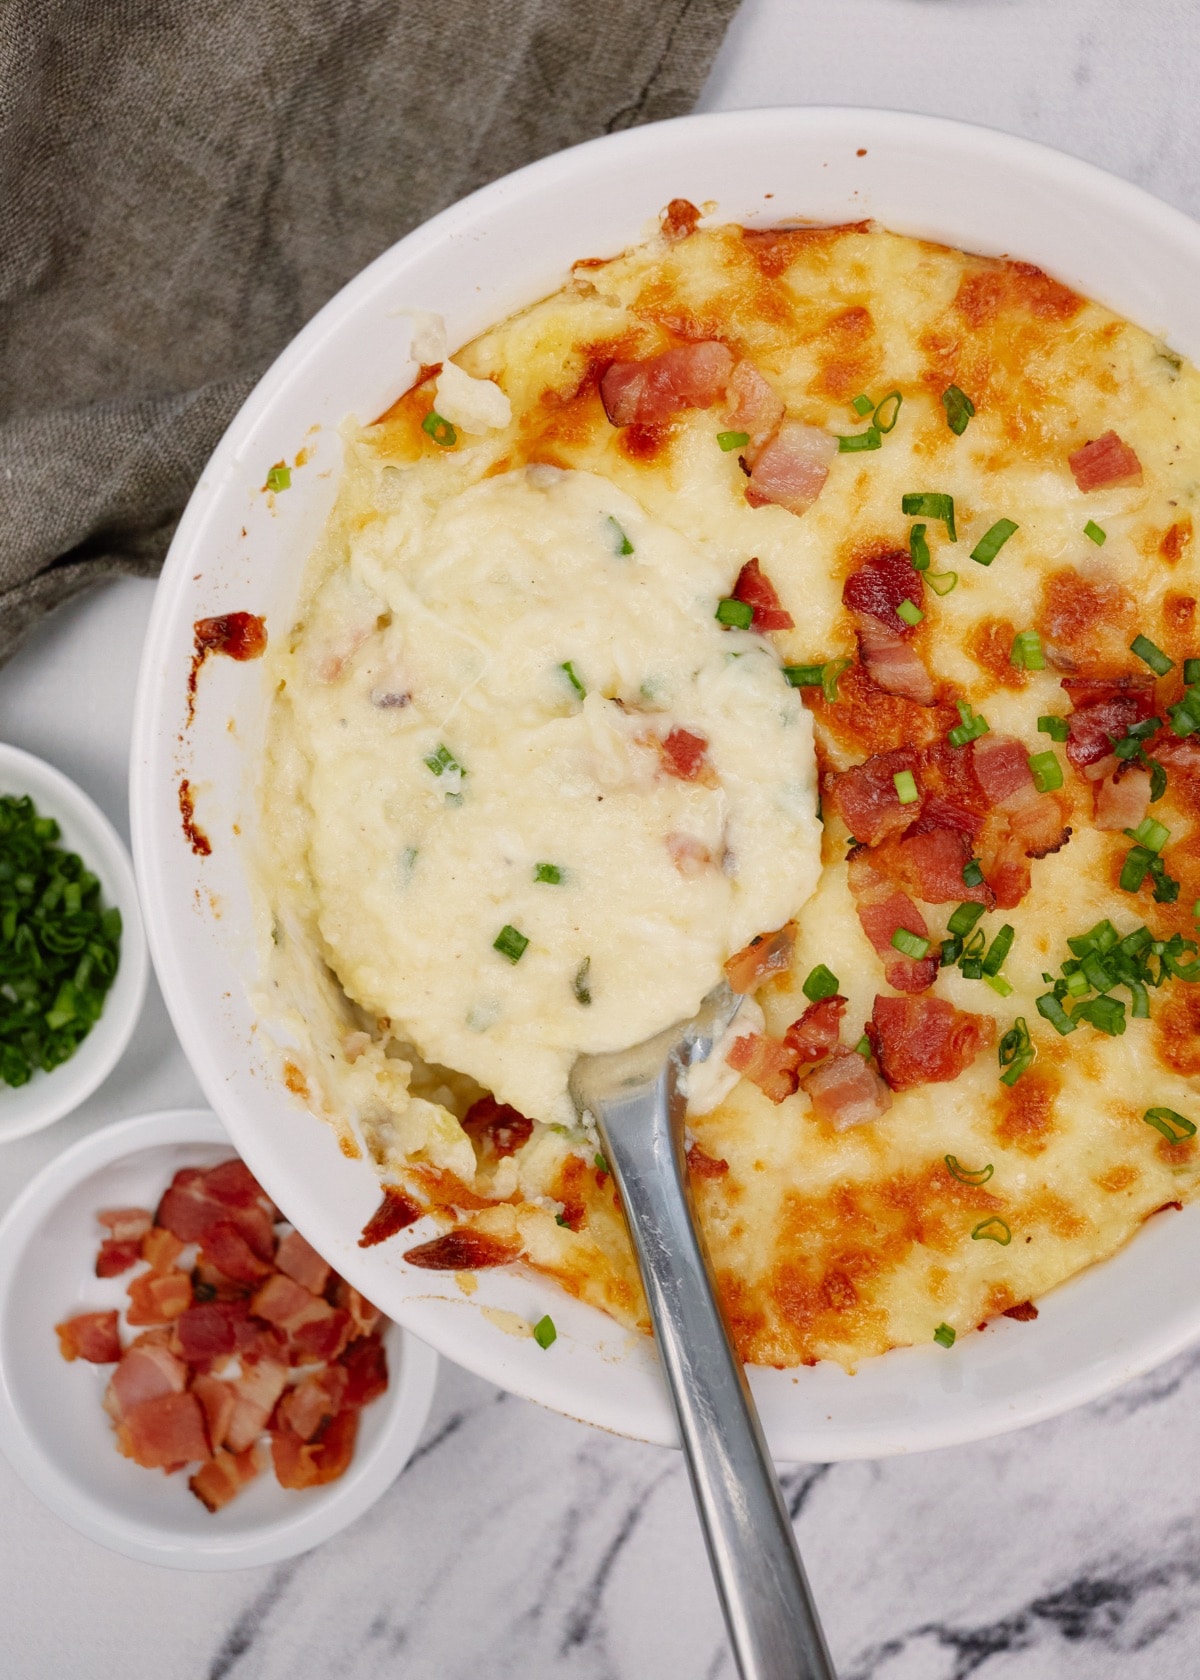 twice baked potato casserole in a baking dish with a spoon topped with bacon and chives